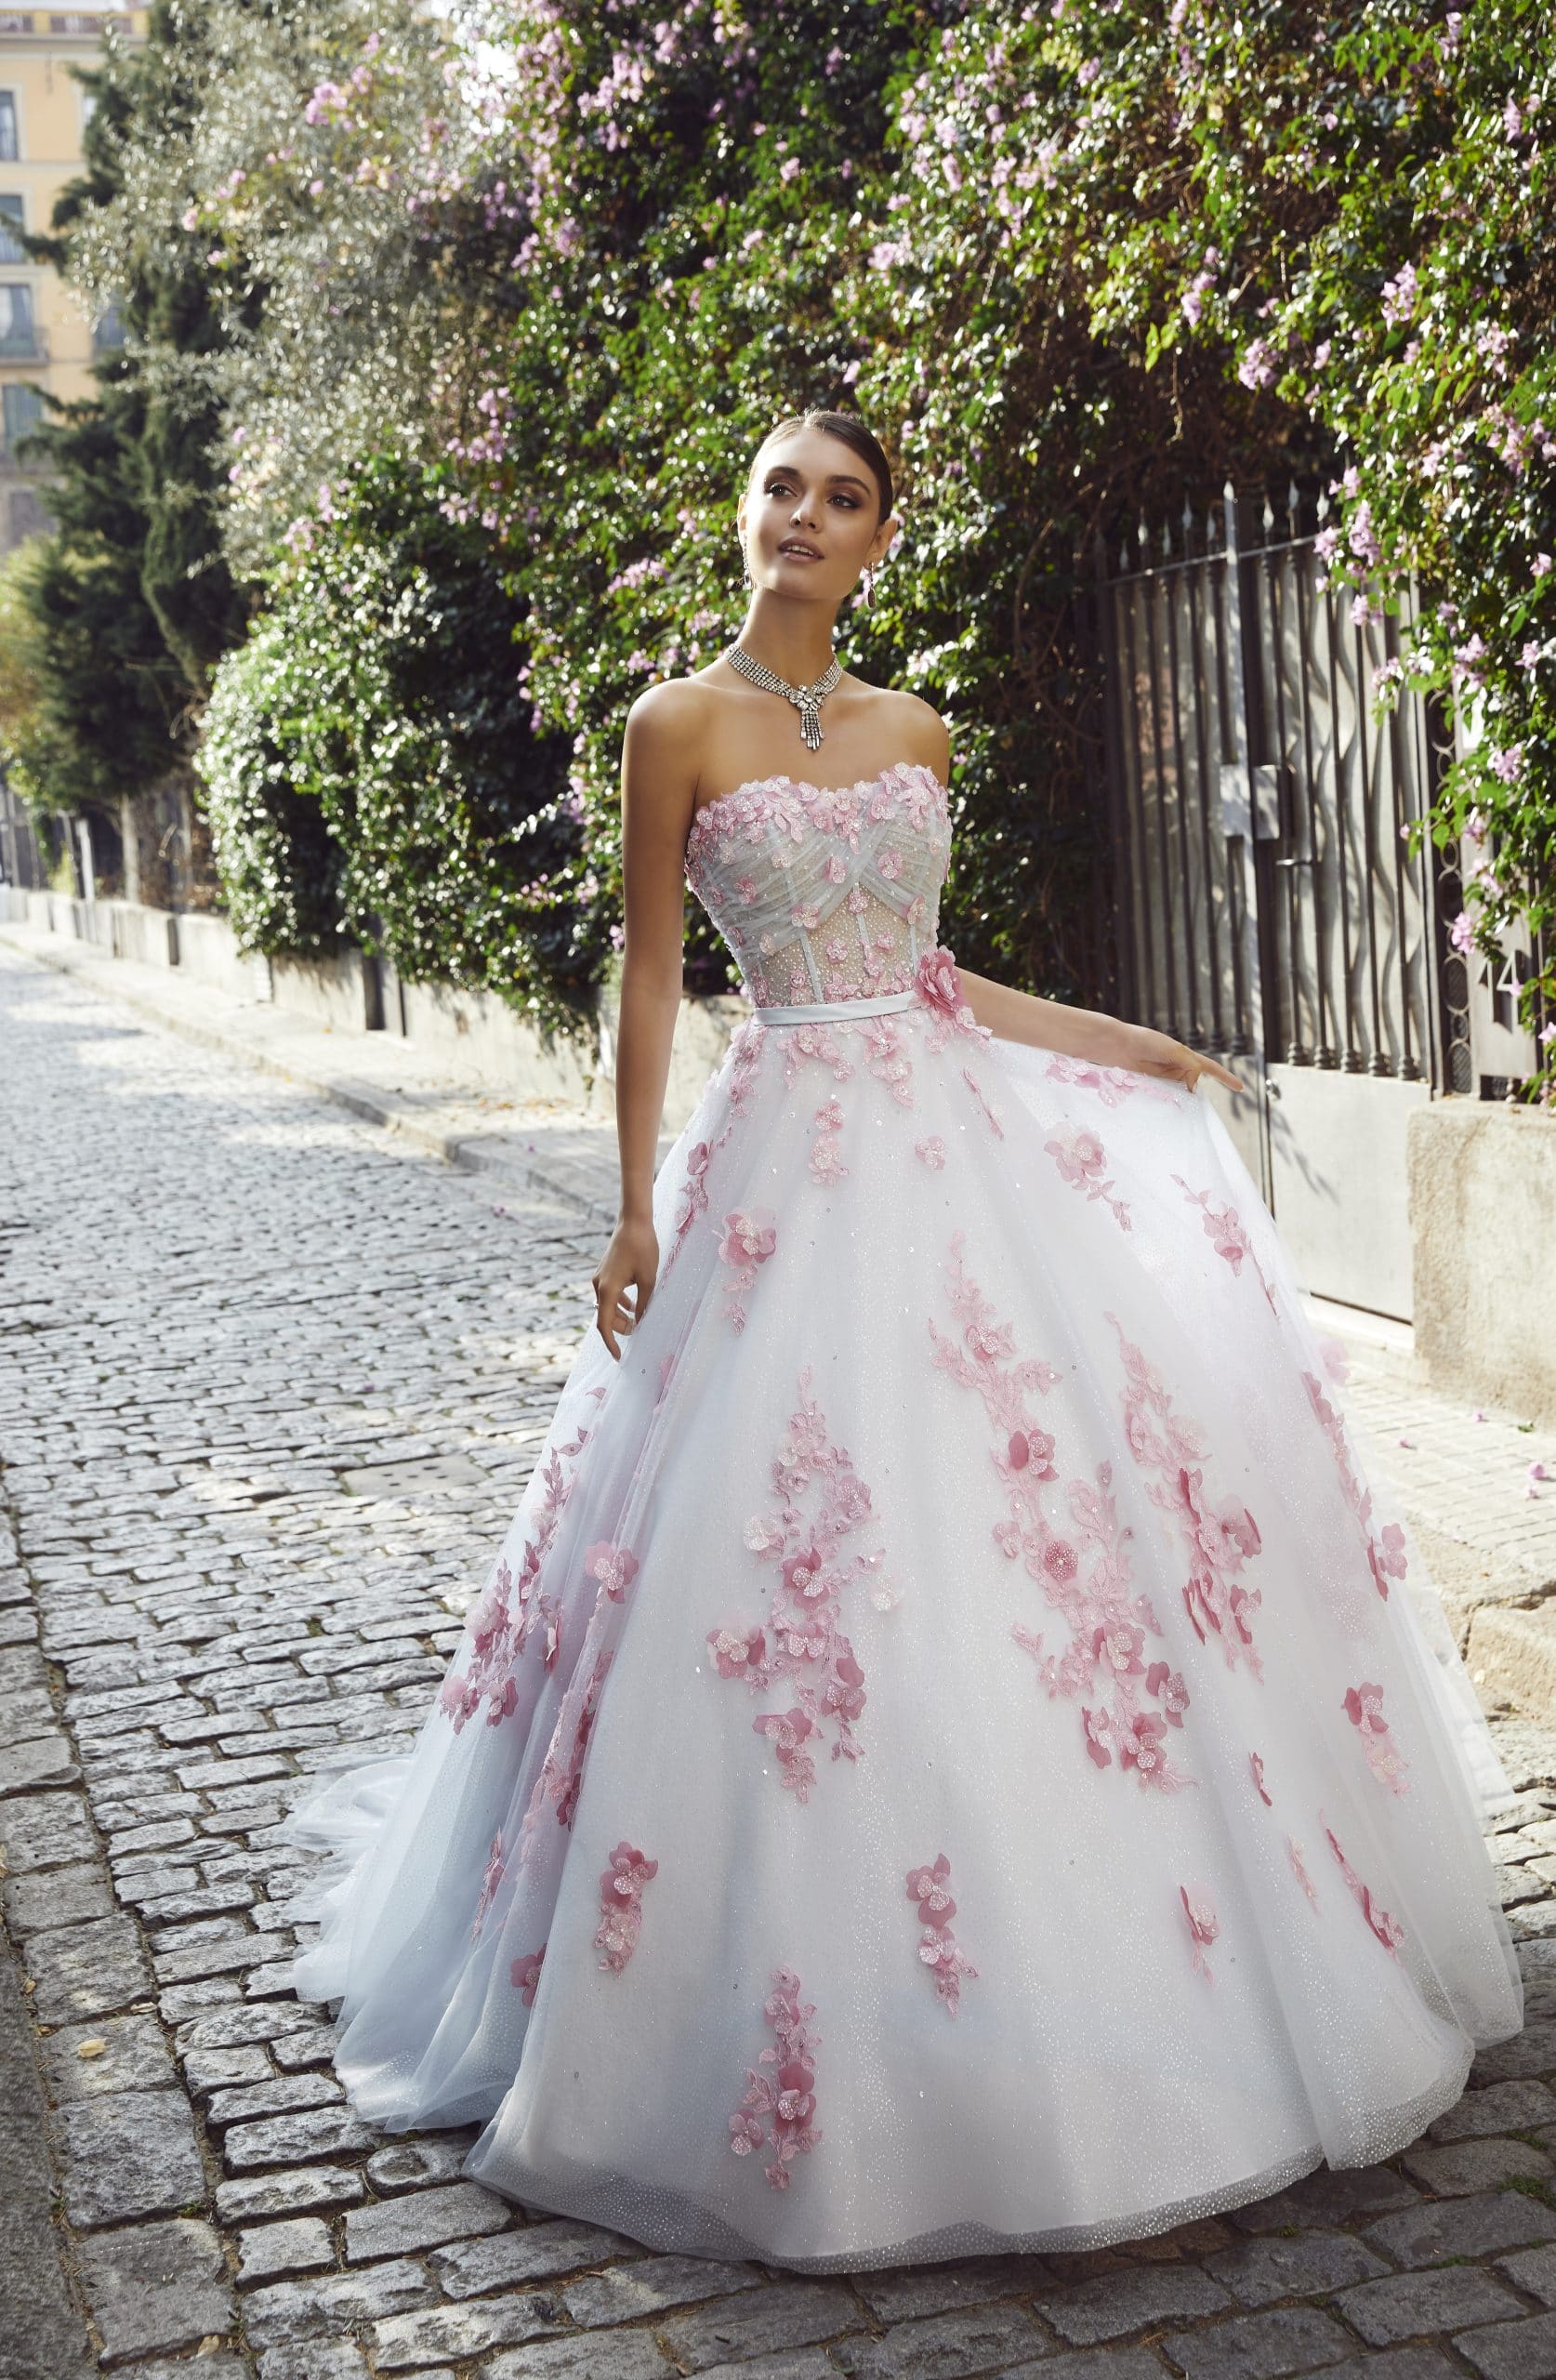 11 Floral Embroidered Wedding Dresses To Make A Statement | Wedding Journal